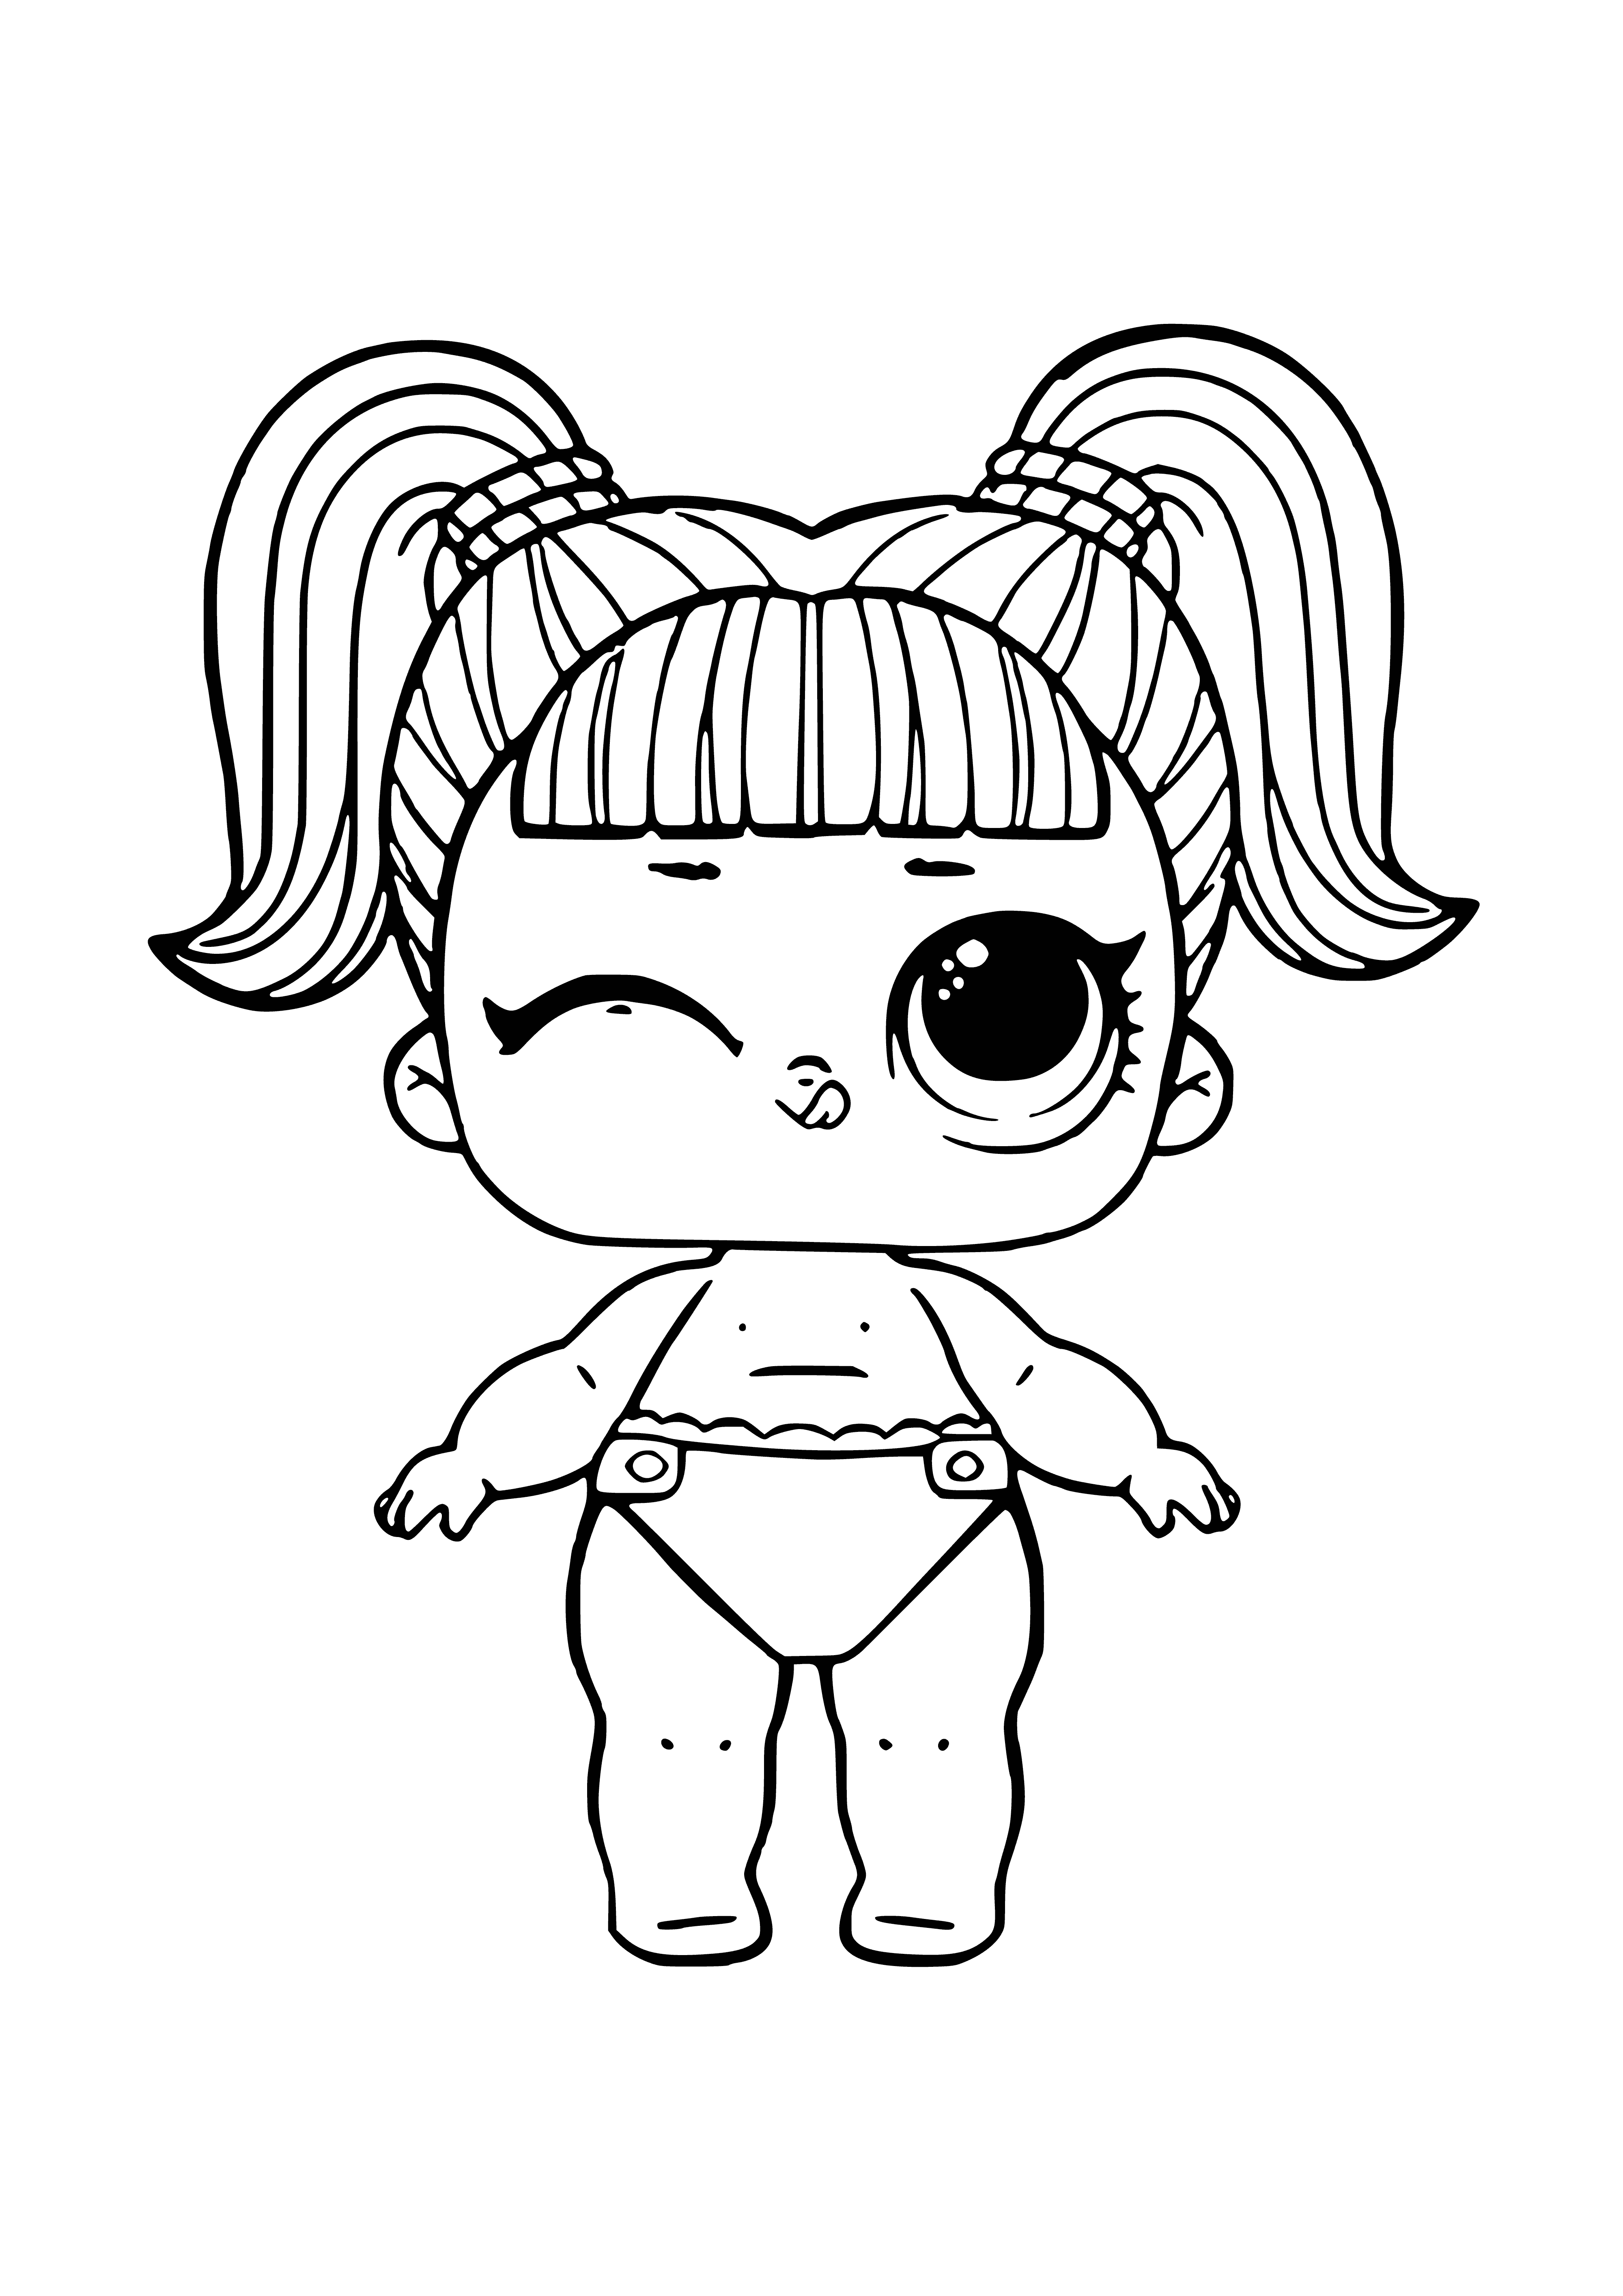 coloring page: A baby dressed in a colorful outfit & sitting in a playpen; with a tiara & scepter in hand.